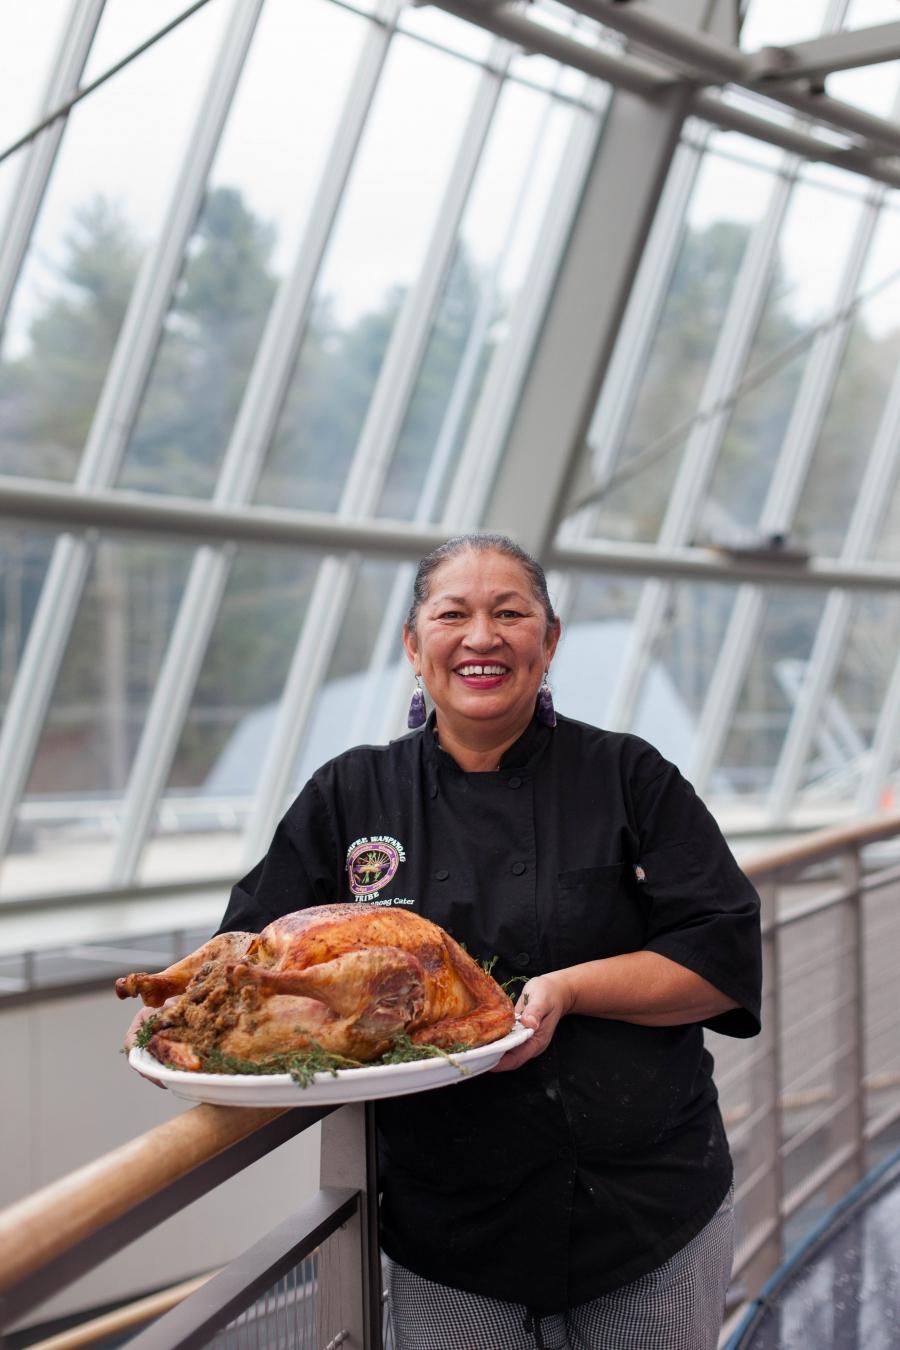 Chef Sherry Pocknett of the Mashpee Wampanoag Nation prepared the FEAST for the second year in a row. “I enjoy welcoming you guys into my life, into the way I grew up, how we eat,” she said to crowd before dinner was served.